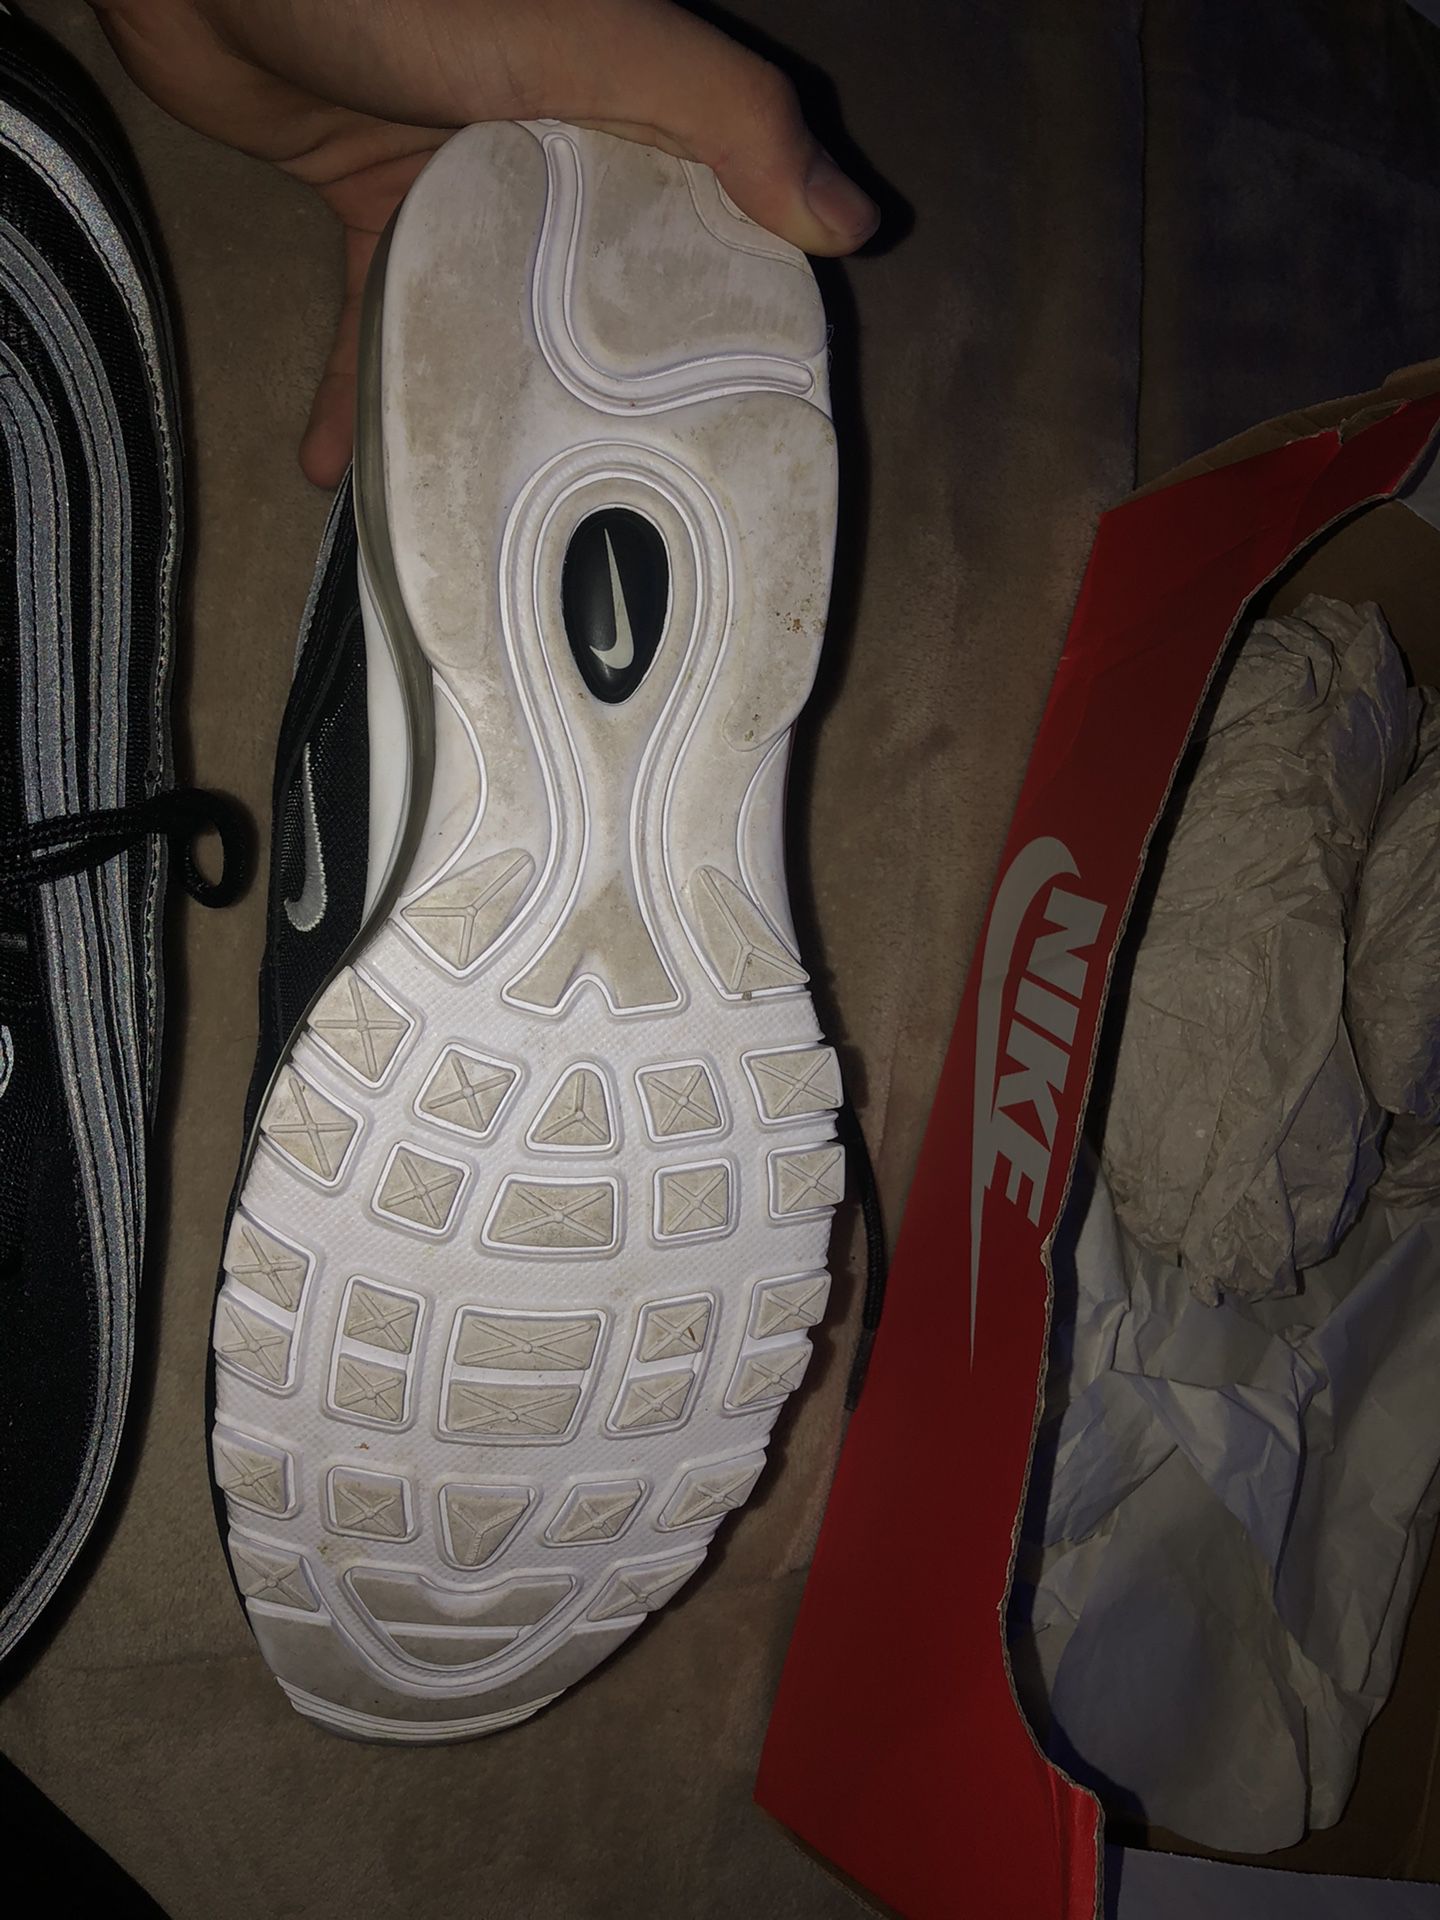 Nike Air max 97 good condition only dirty place in the shoes is the soles.worn a couple times then I never wore them again